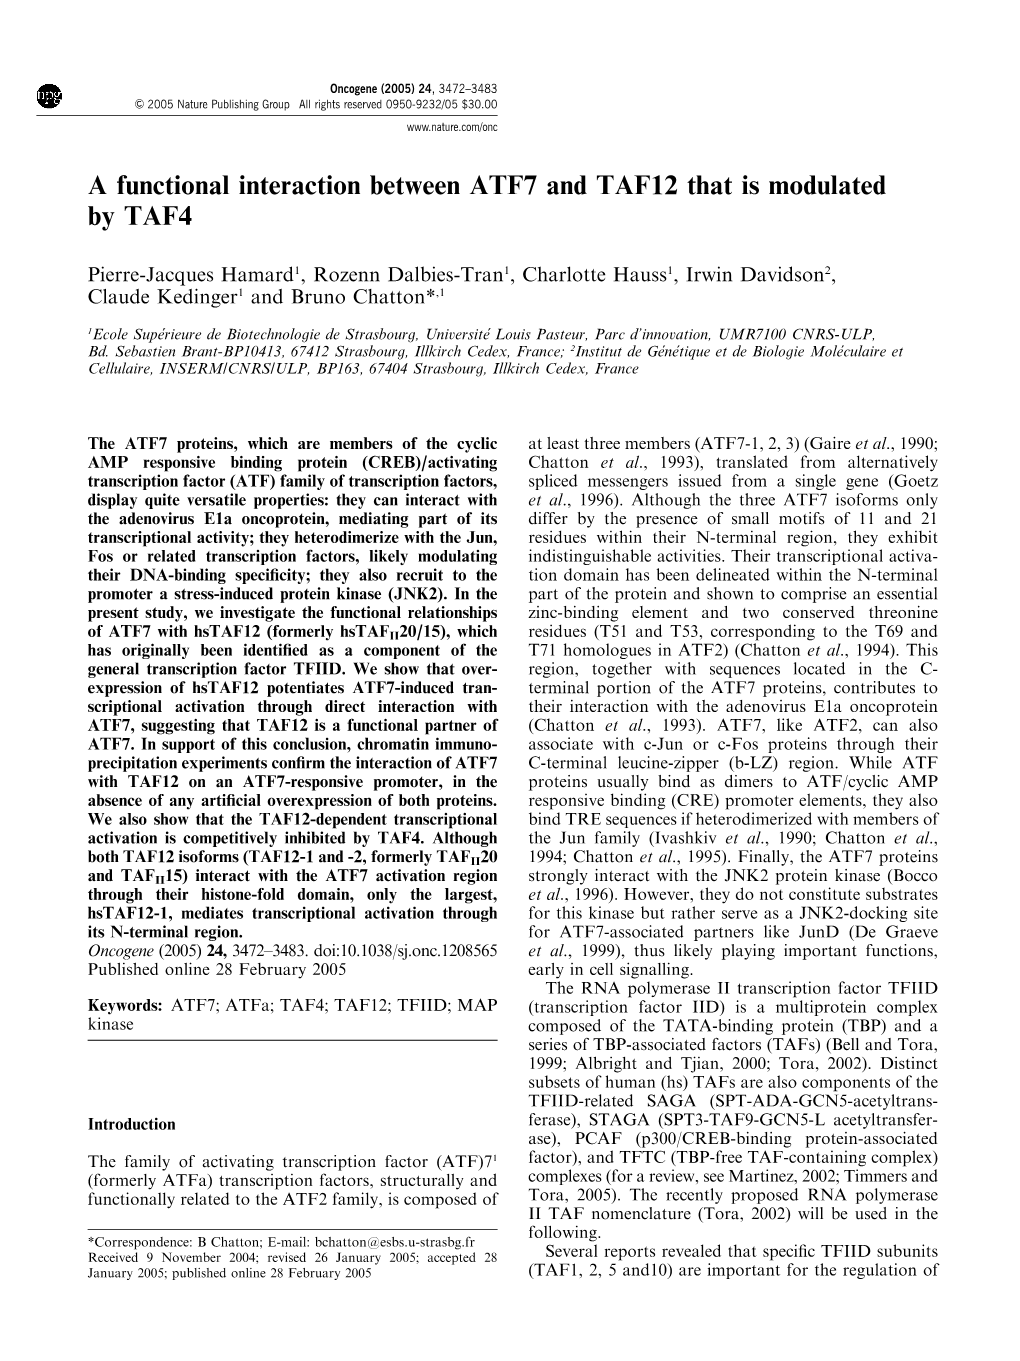 A Functional Interaction Between ATF7 and TAF12 That Is Modulated by TAF4